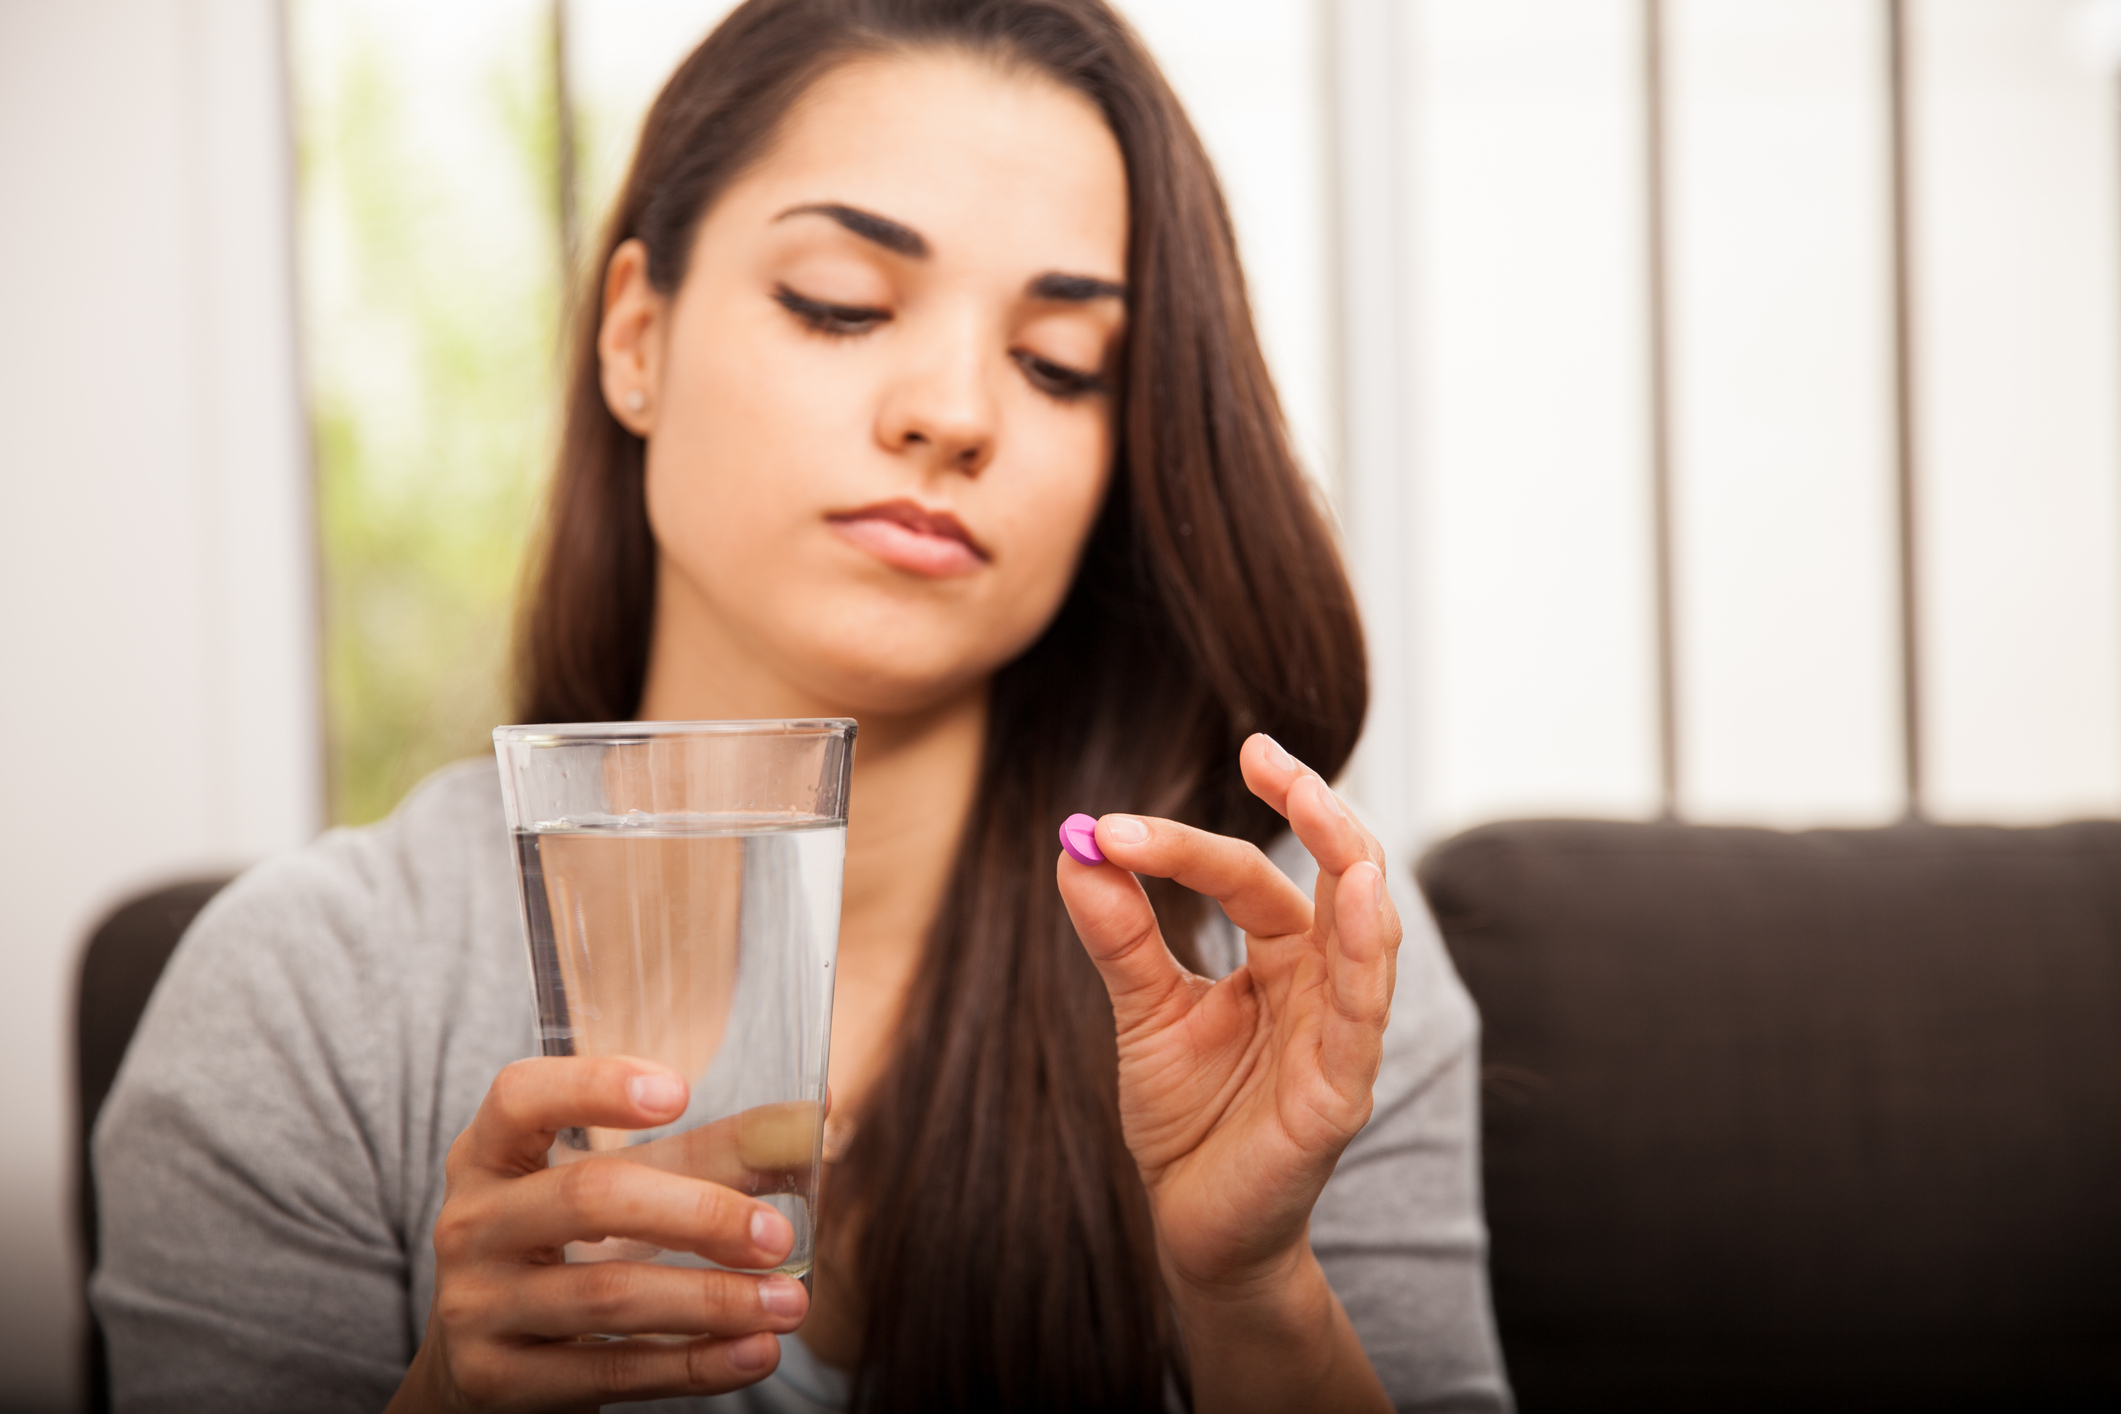 Generic photo of young woman holding a pill and glass of water (Thinkstock/PA)